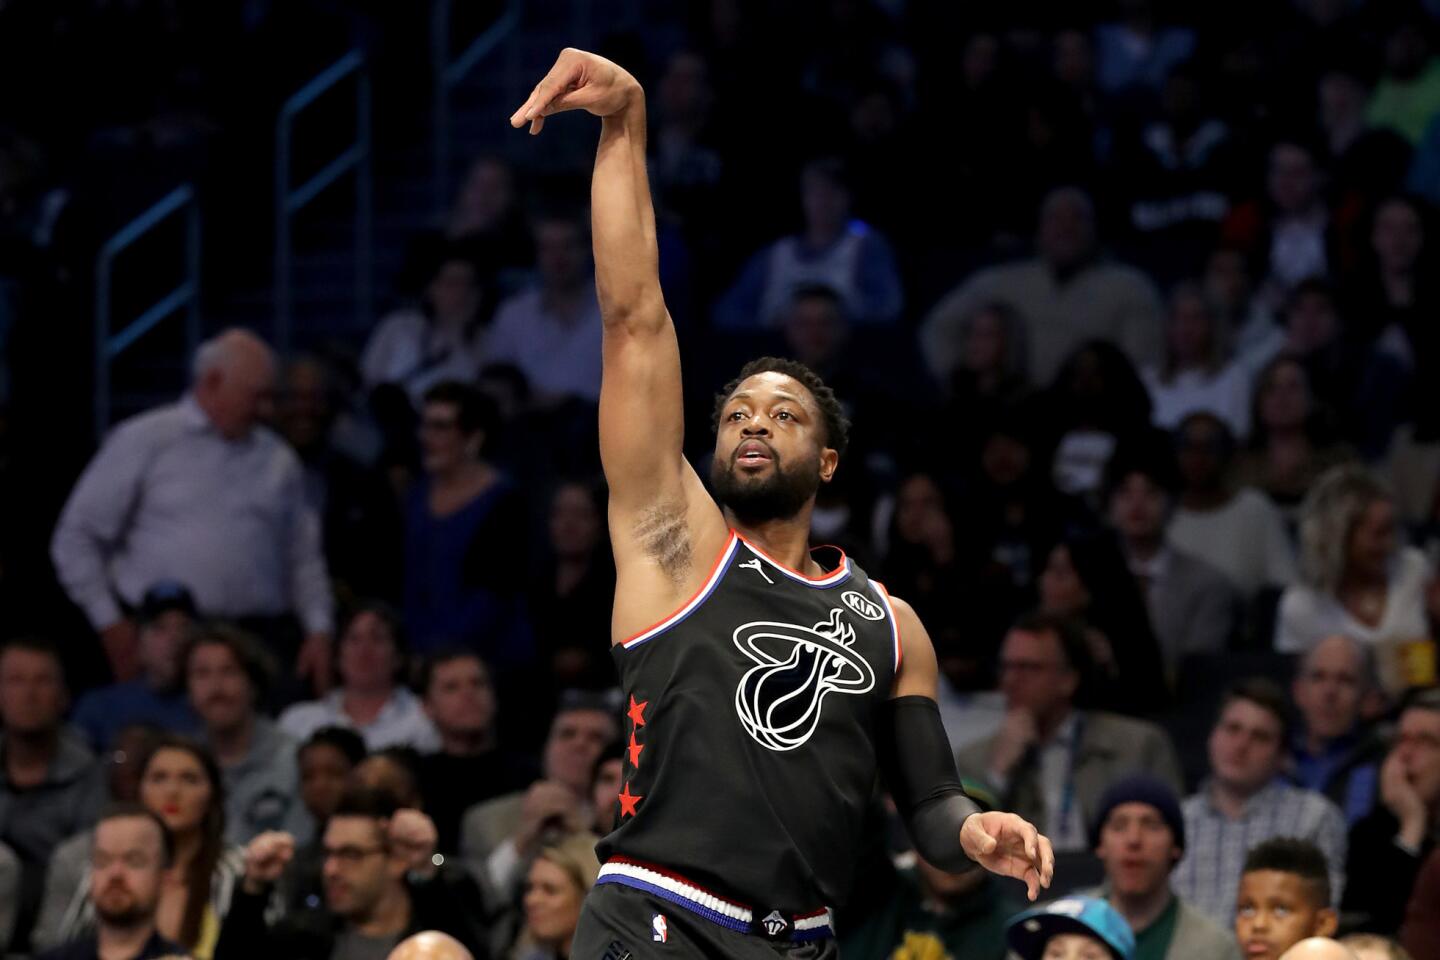 Dwyane Wade and Dirk Nowitzki added to 2019 NBA All-Star game in